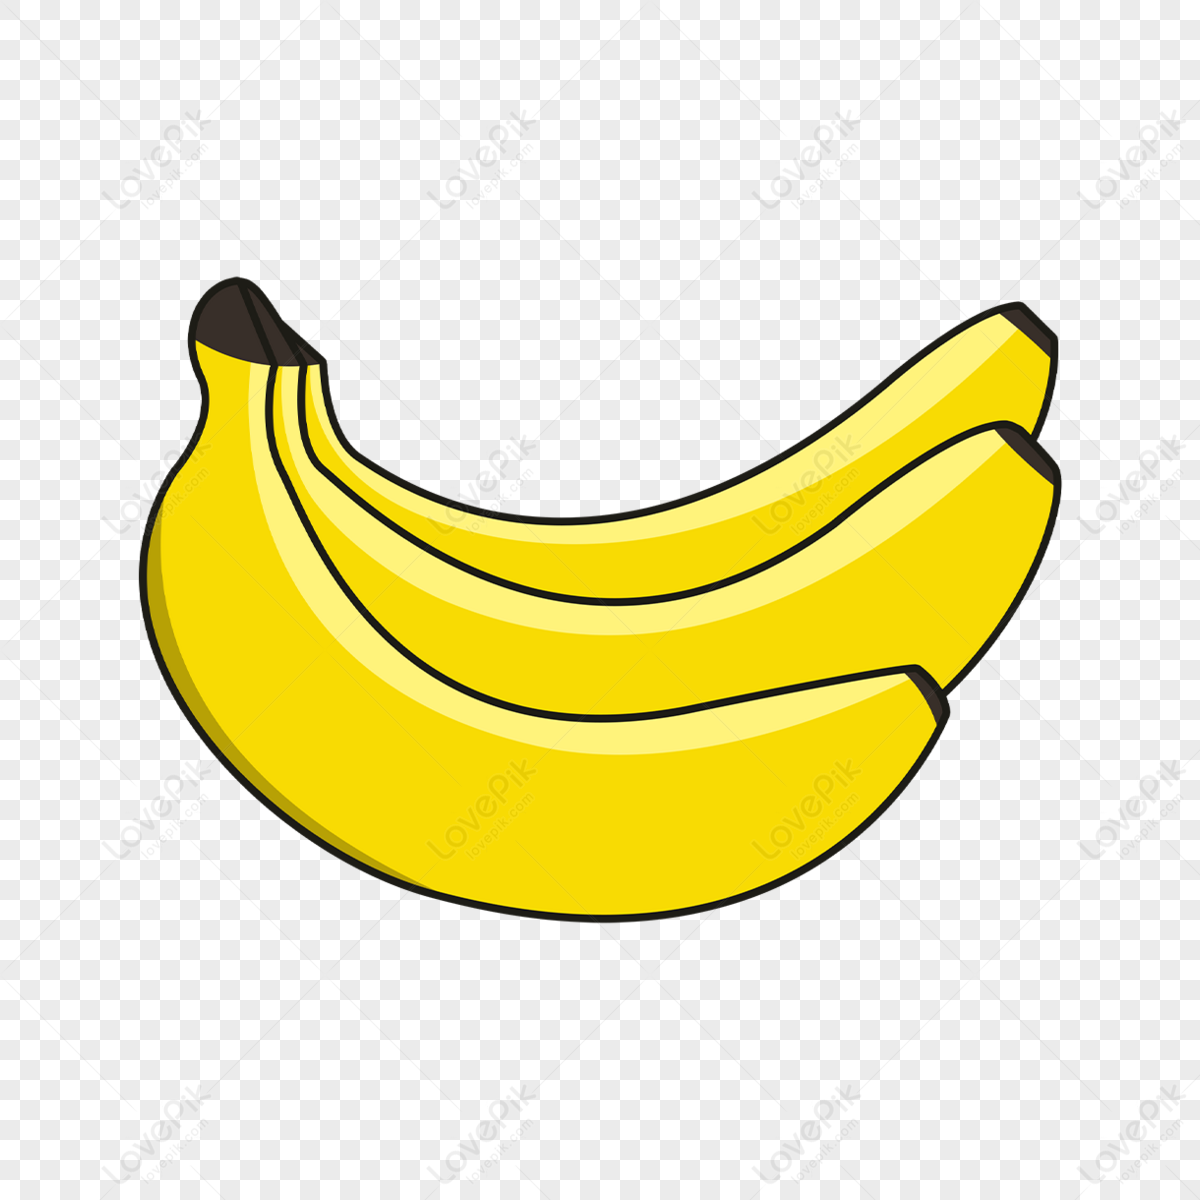 Banana Clipart Yellow Element,fruit,crops,pulp PNG Image And Clipart ...